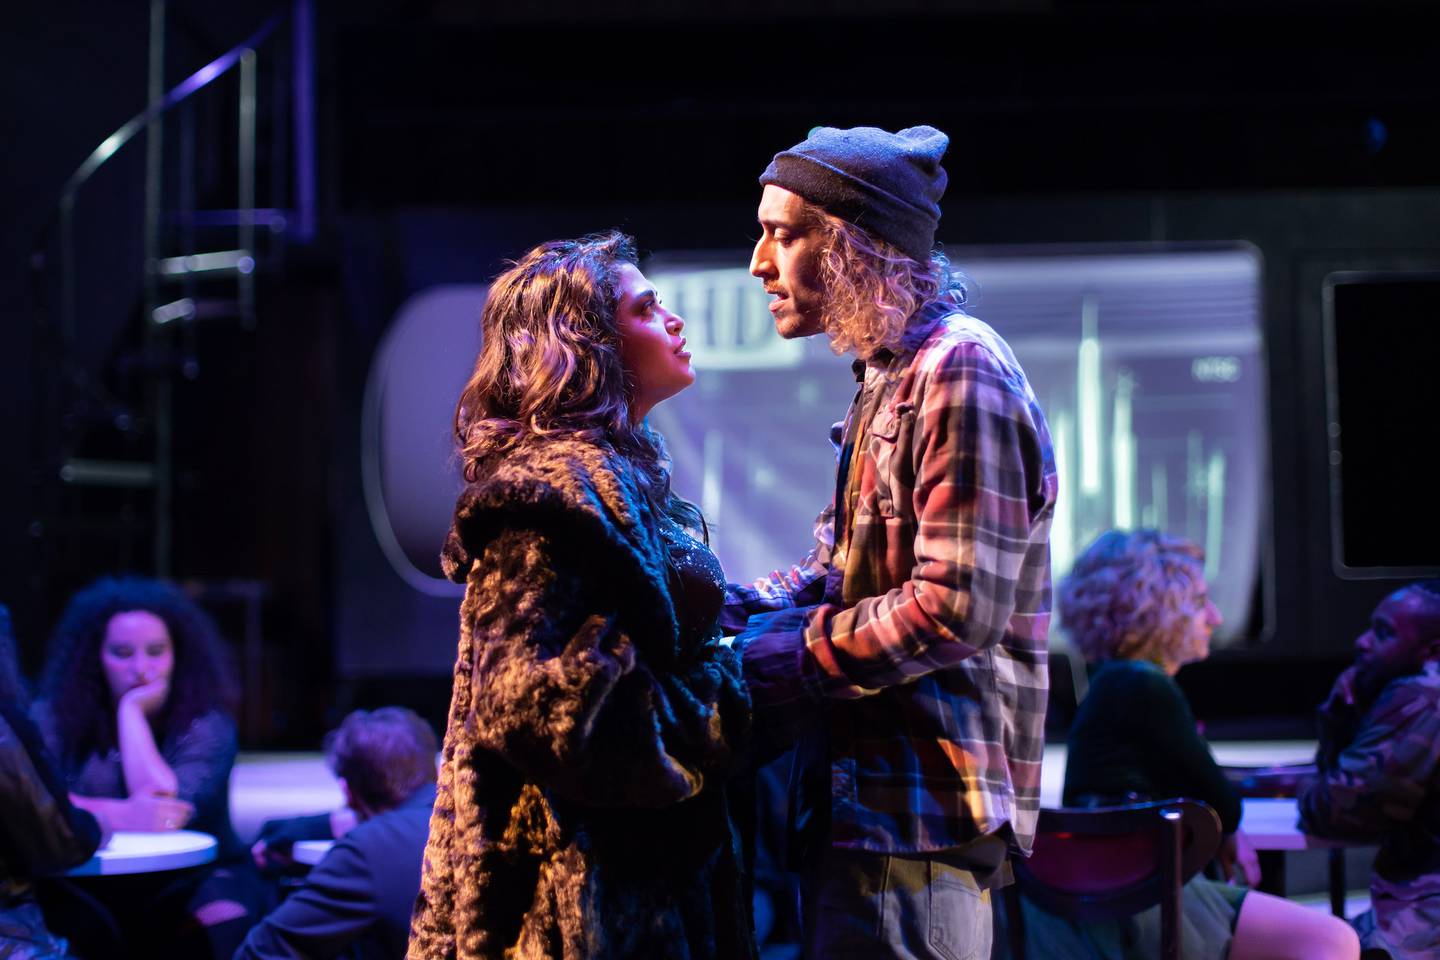 Alix Rhode as MIMI MARQUEZ and Shraga D. Wasserman as ROGER DAVIS in RENT from Porchlight Music Theatre now playing through November 27 at the Ruth Page Center for the Arts